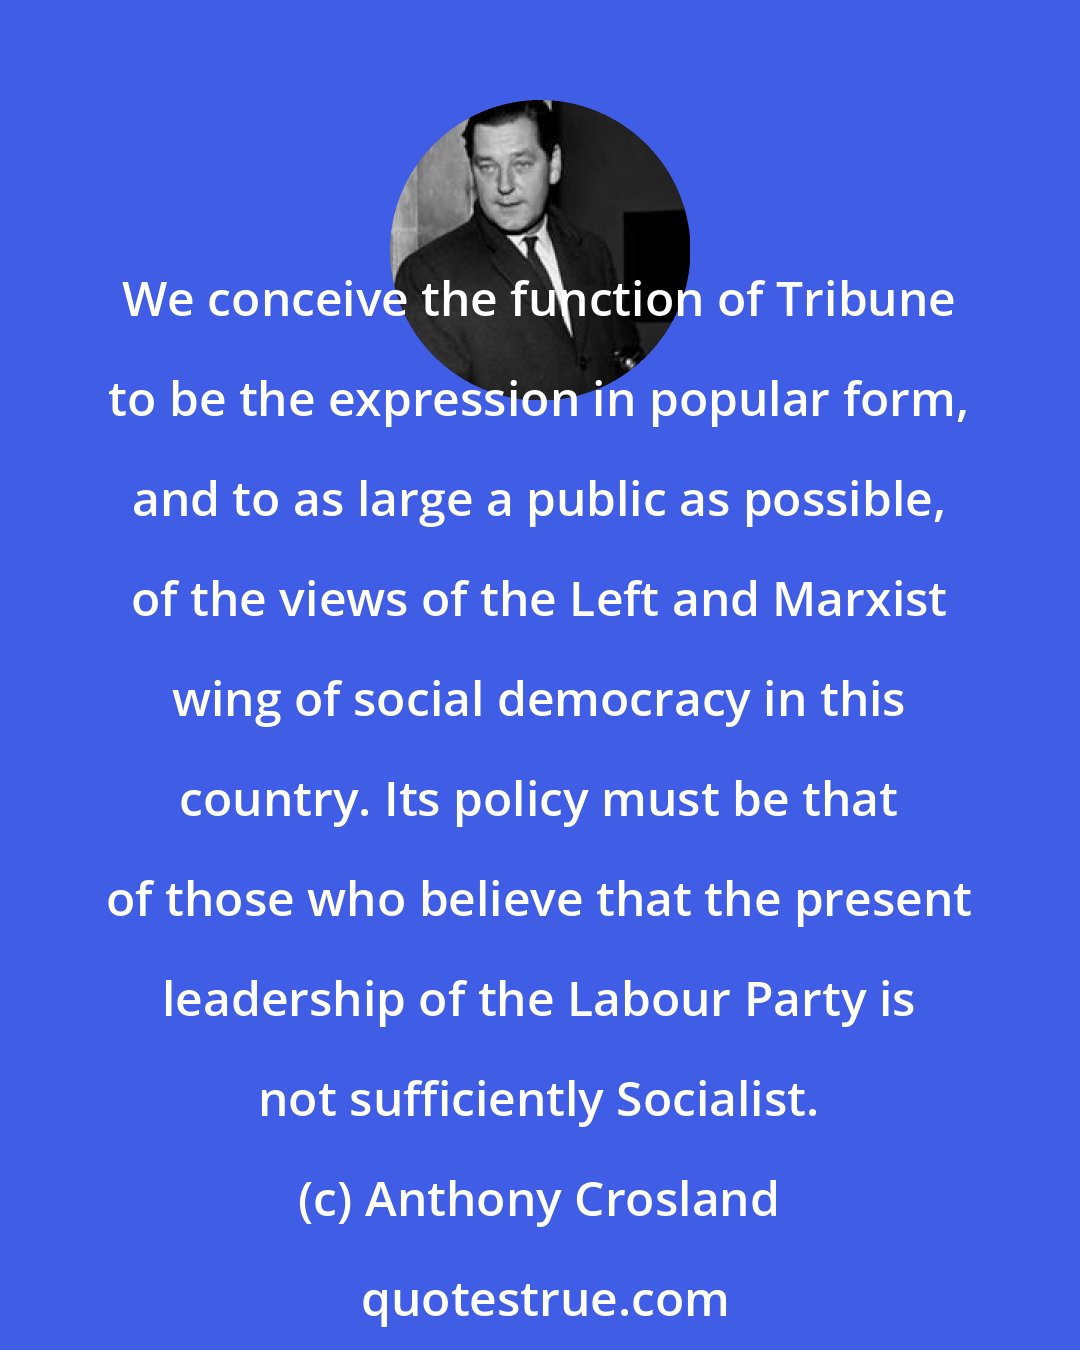 Anthony Crosland: We conceive the function of Tribune to be the expression in popular form, and to as large a public as possible, of the views of the Left and Marxist wing of social democracy in this country. Its policy must be that of those who believe that the present leadership of the Labour Party is not sufficiently Socialist.